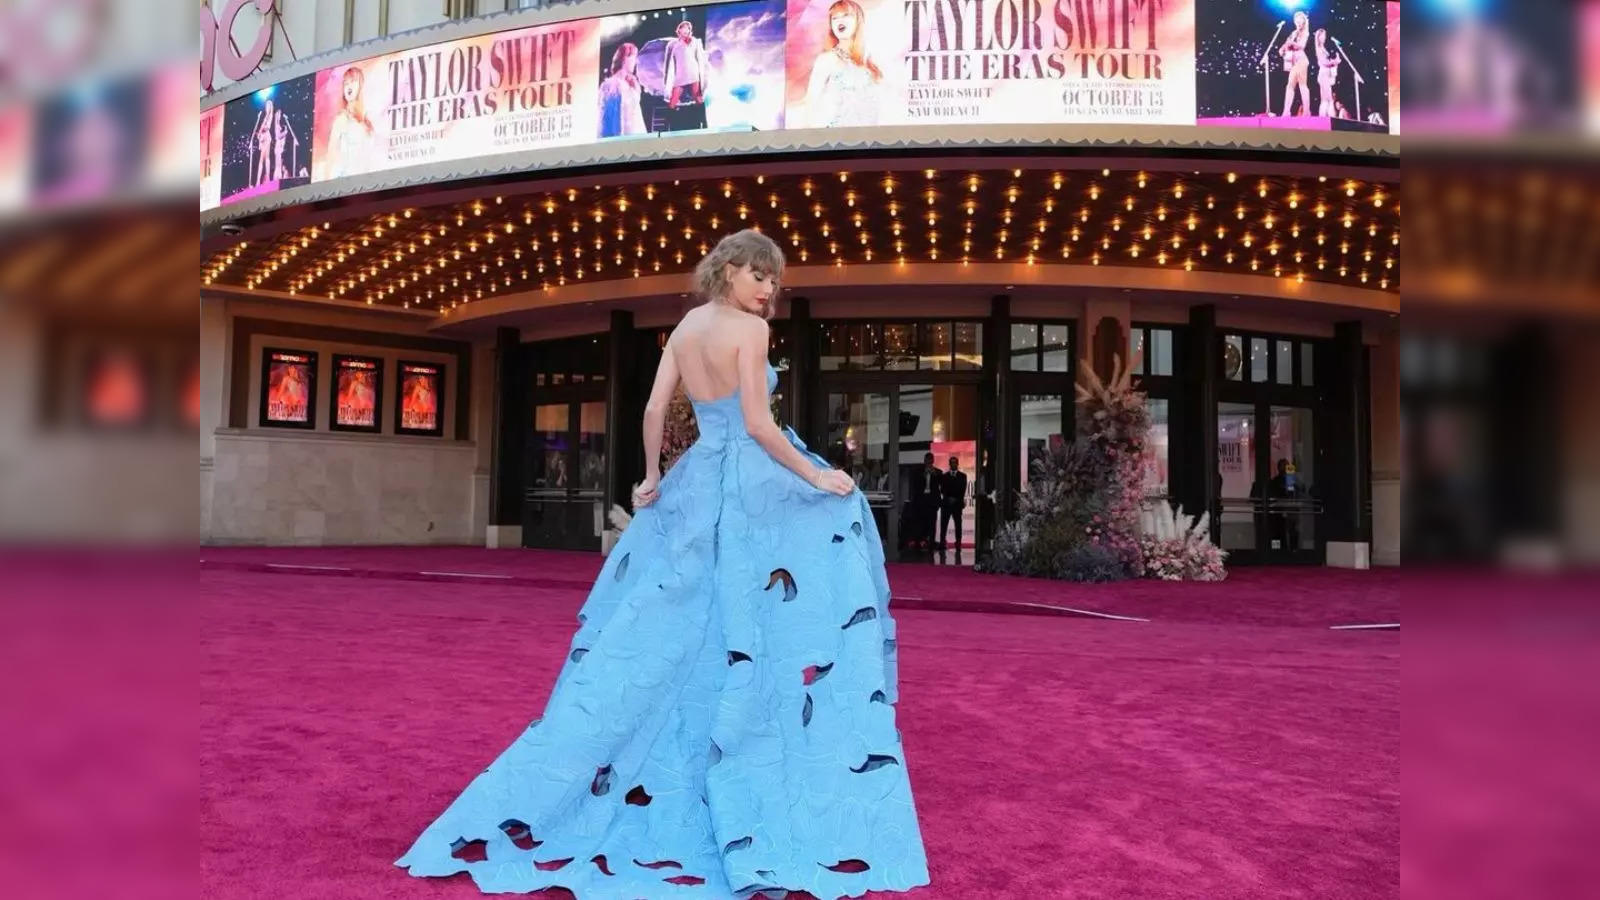 Eras Tour: Taylor Swift attends early premiere of 'Eras Tour' concert film  following 'unprecedented' ticket demand; movie expected to earn around $140  mn on opening weekend - The Economic Times